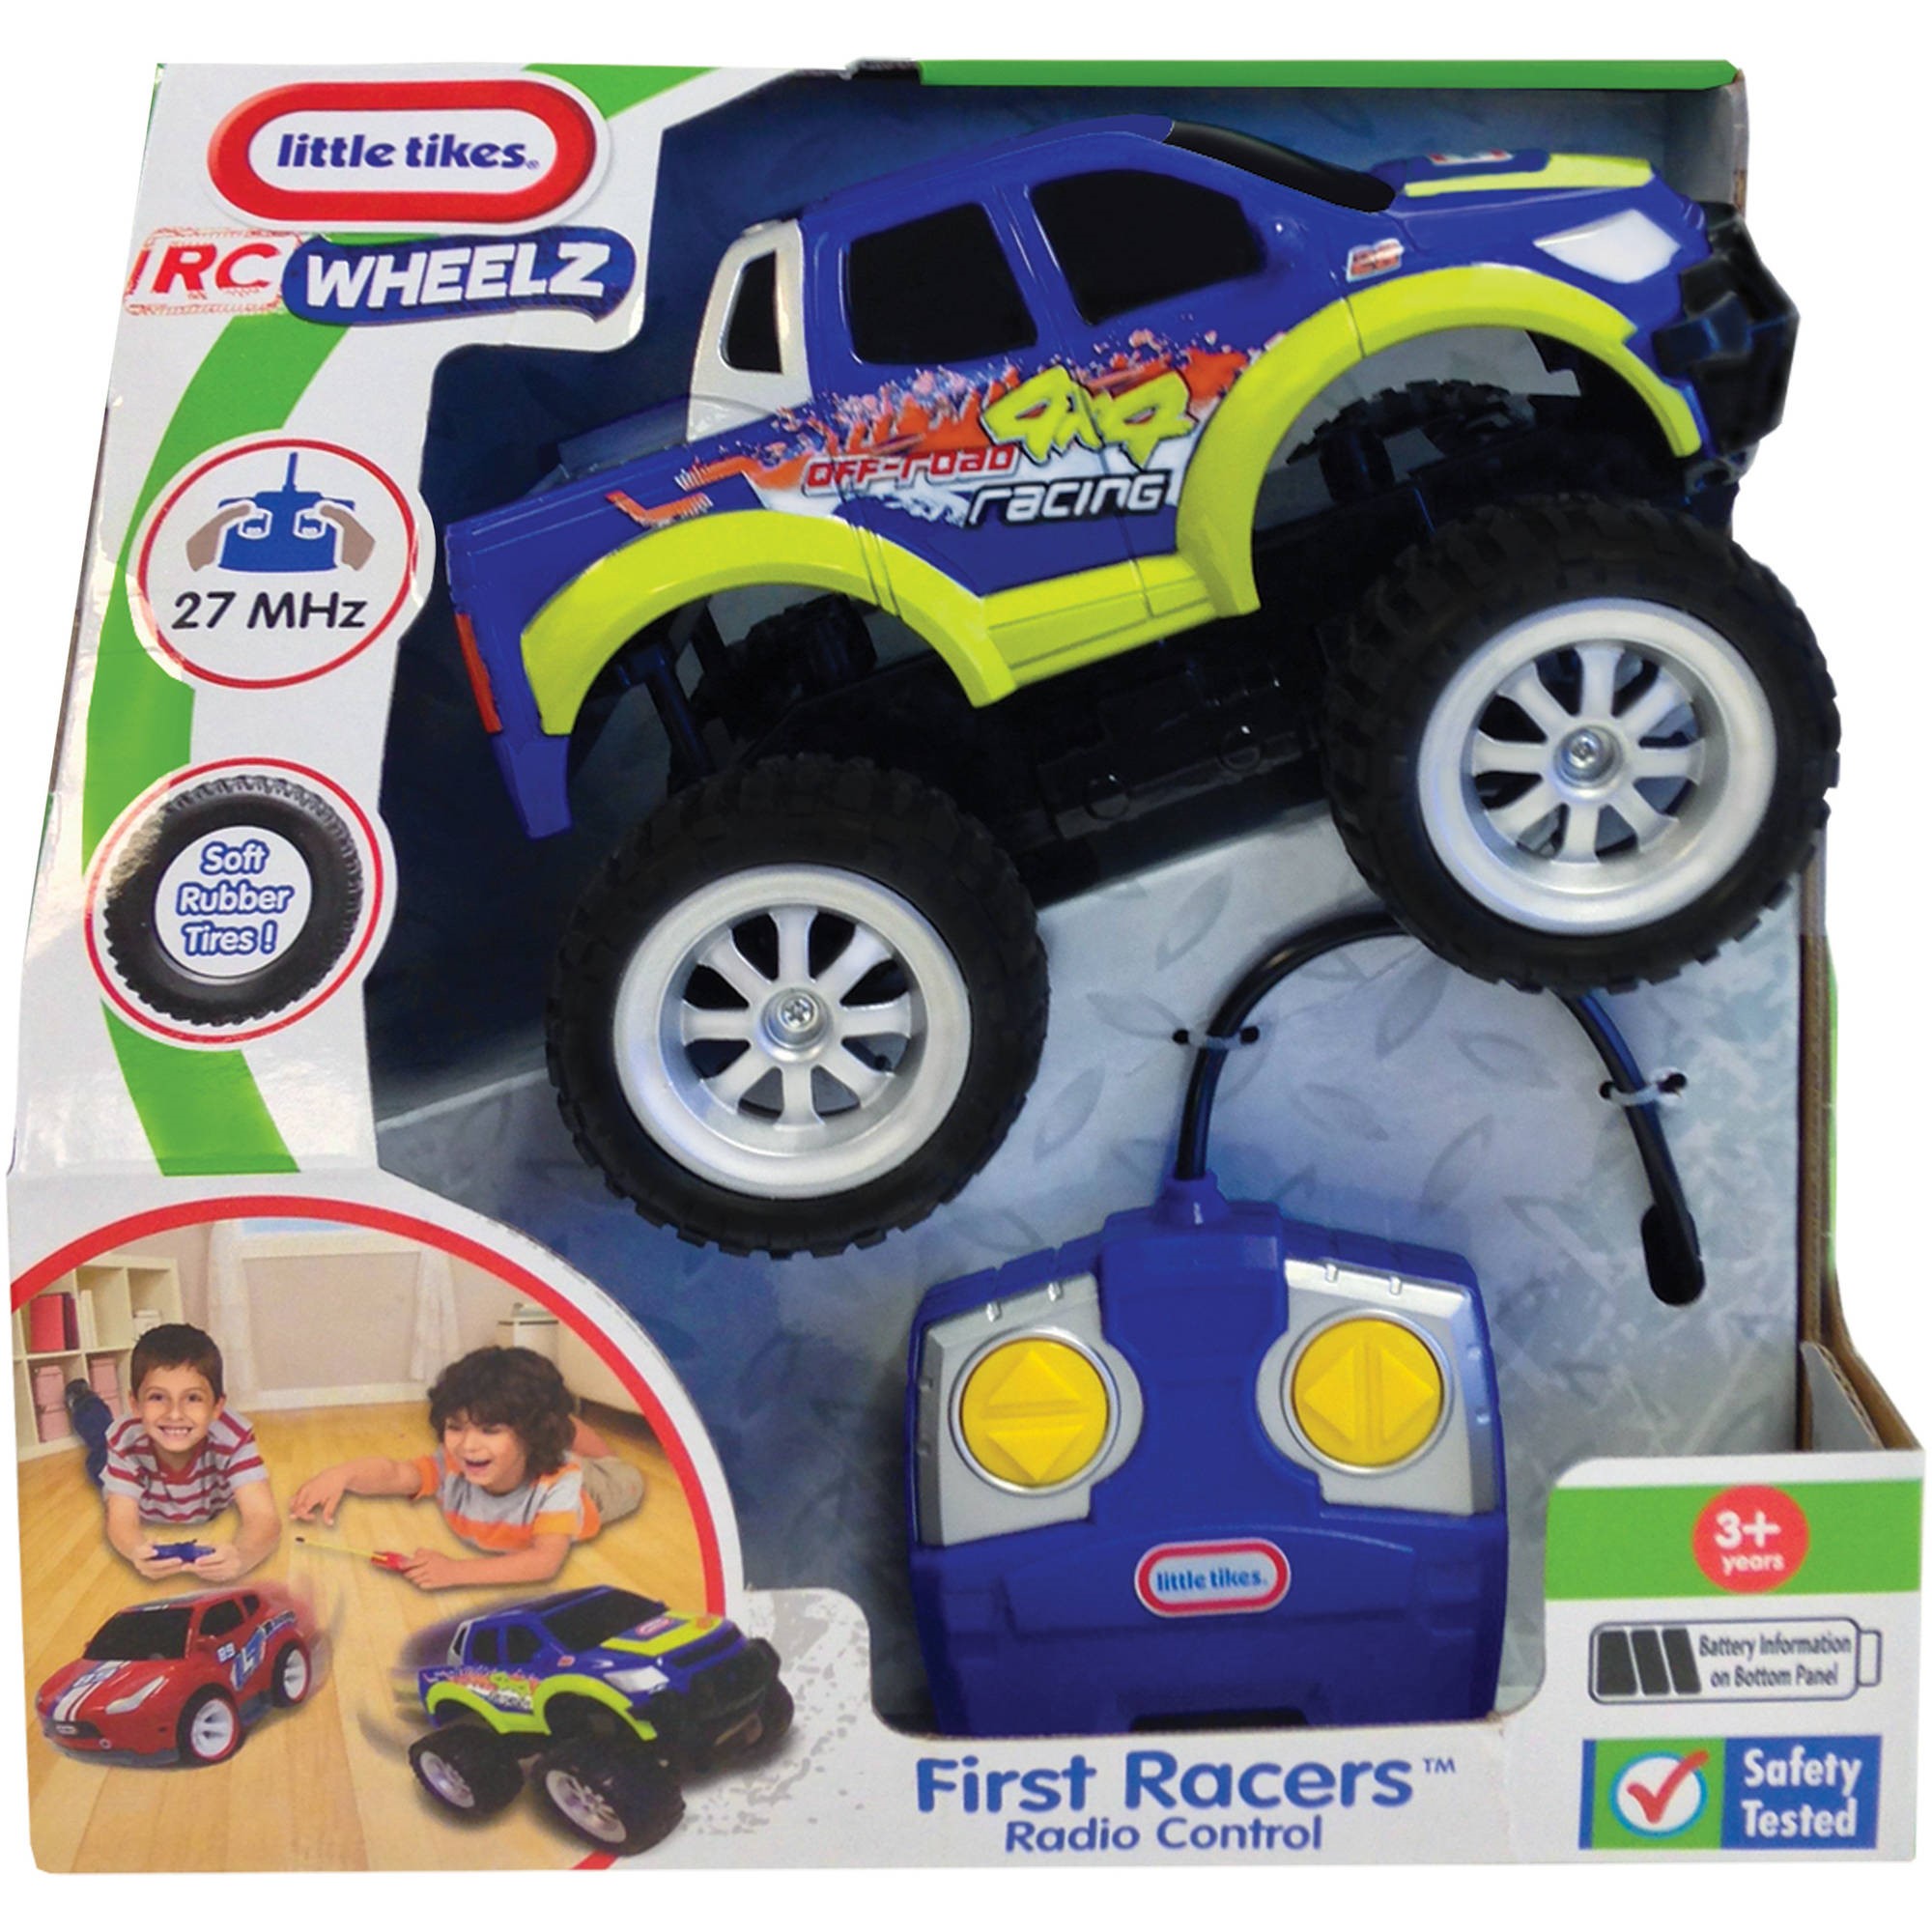 Little Tikes RC Wheelz First Racers Radio Controlled Truck - image 1 of 2